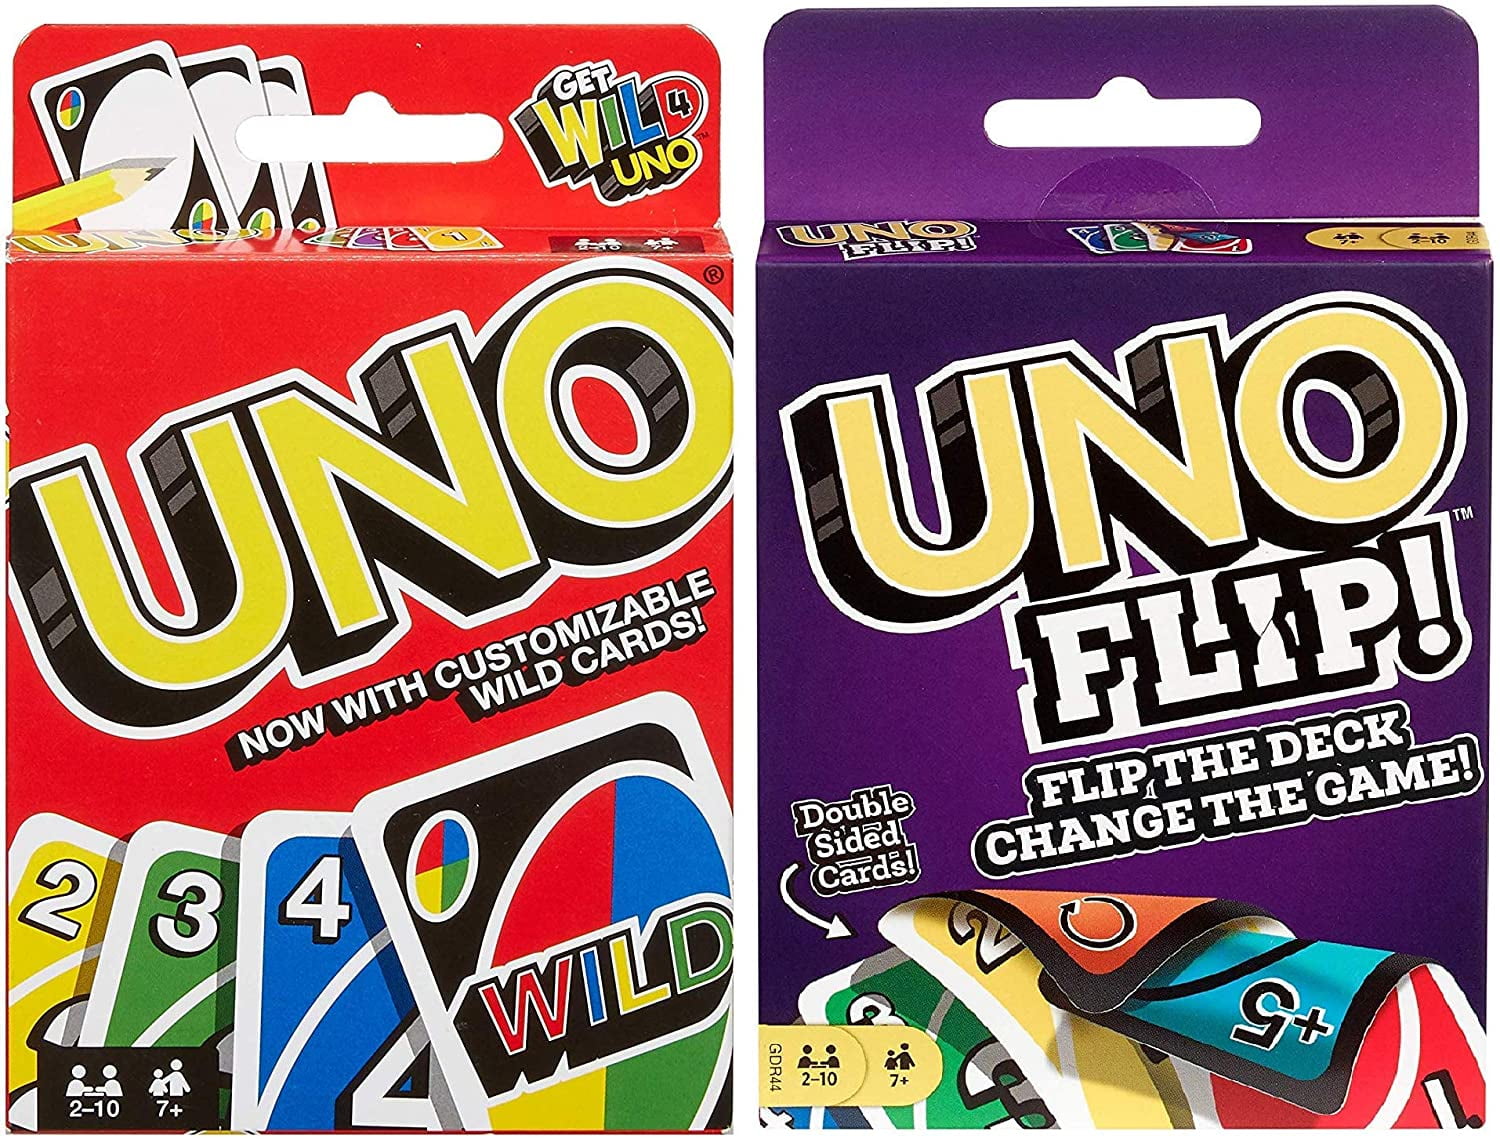 DOS Uno Family Card Game or Flip Card Game Mattel Games Uno Wild Card Game 